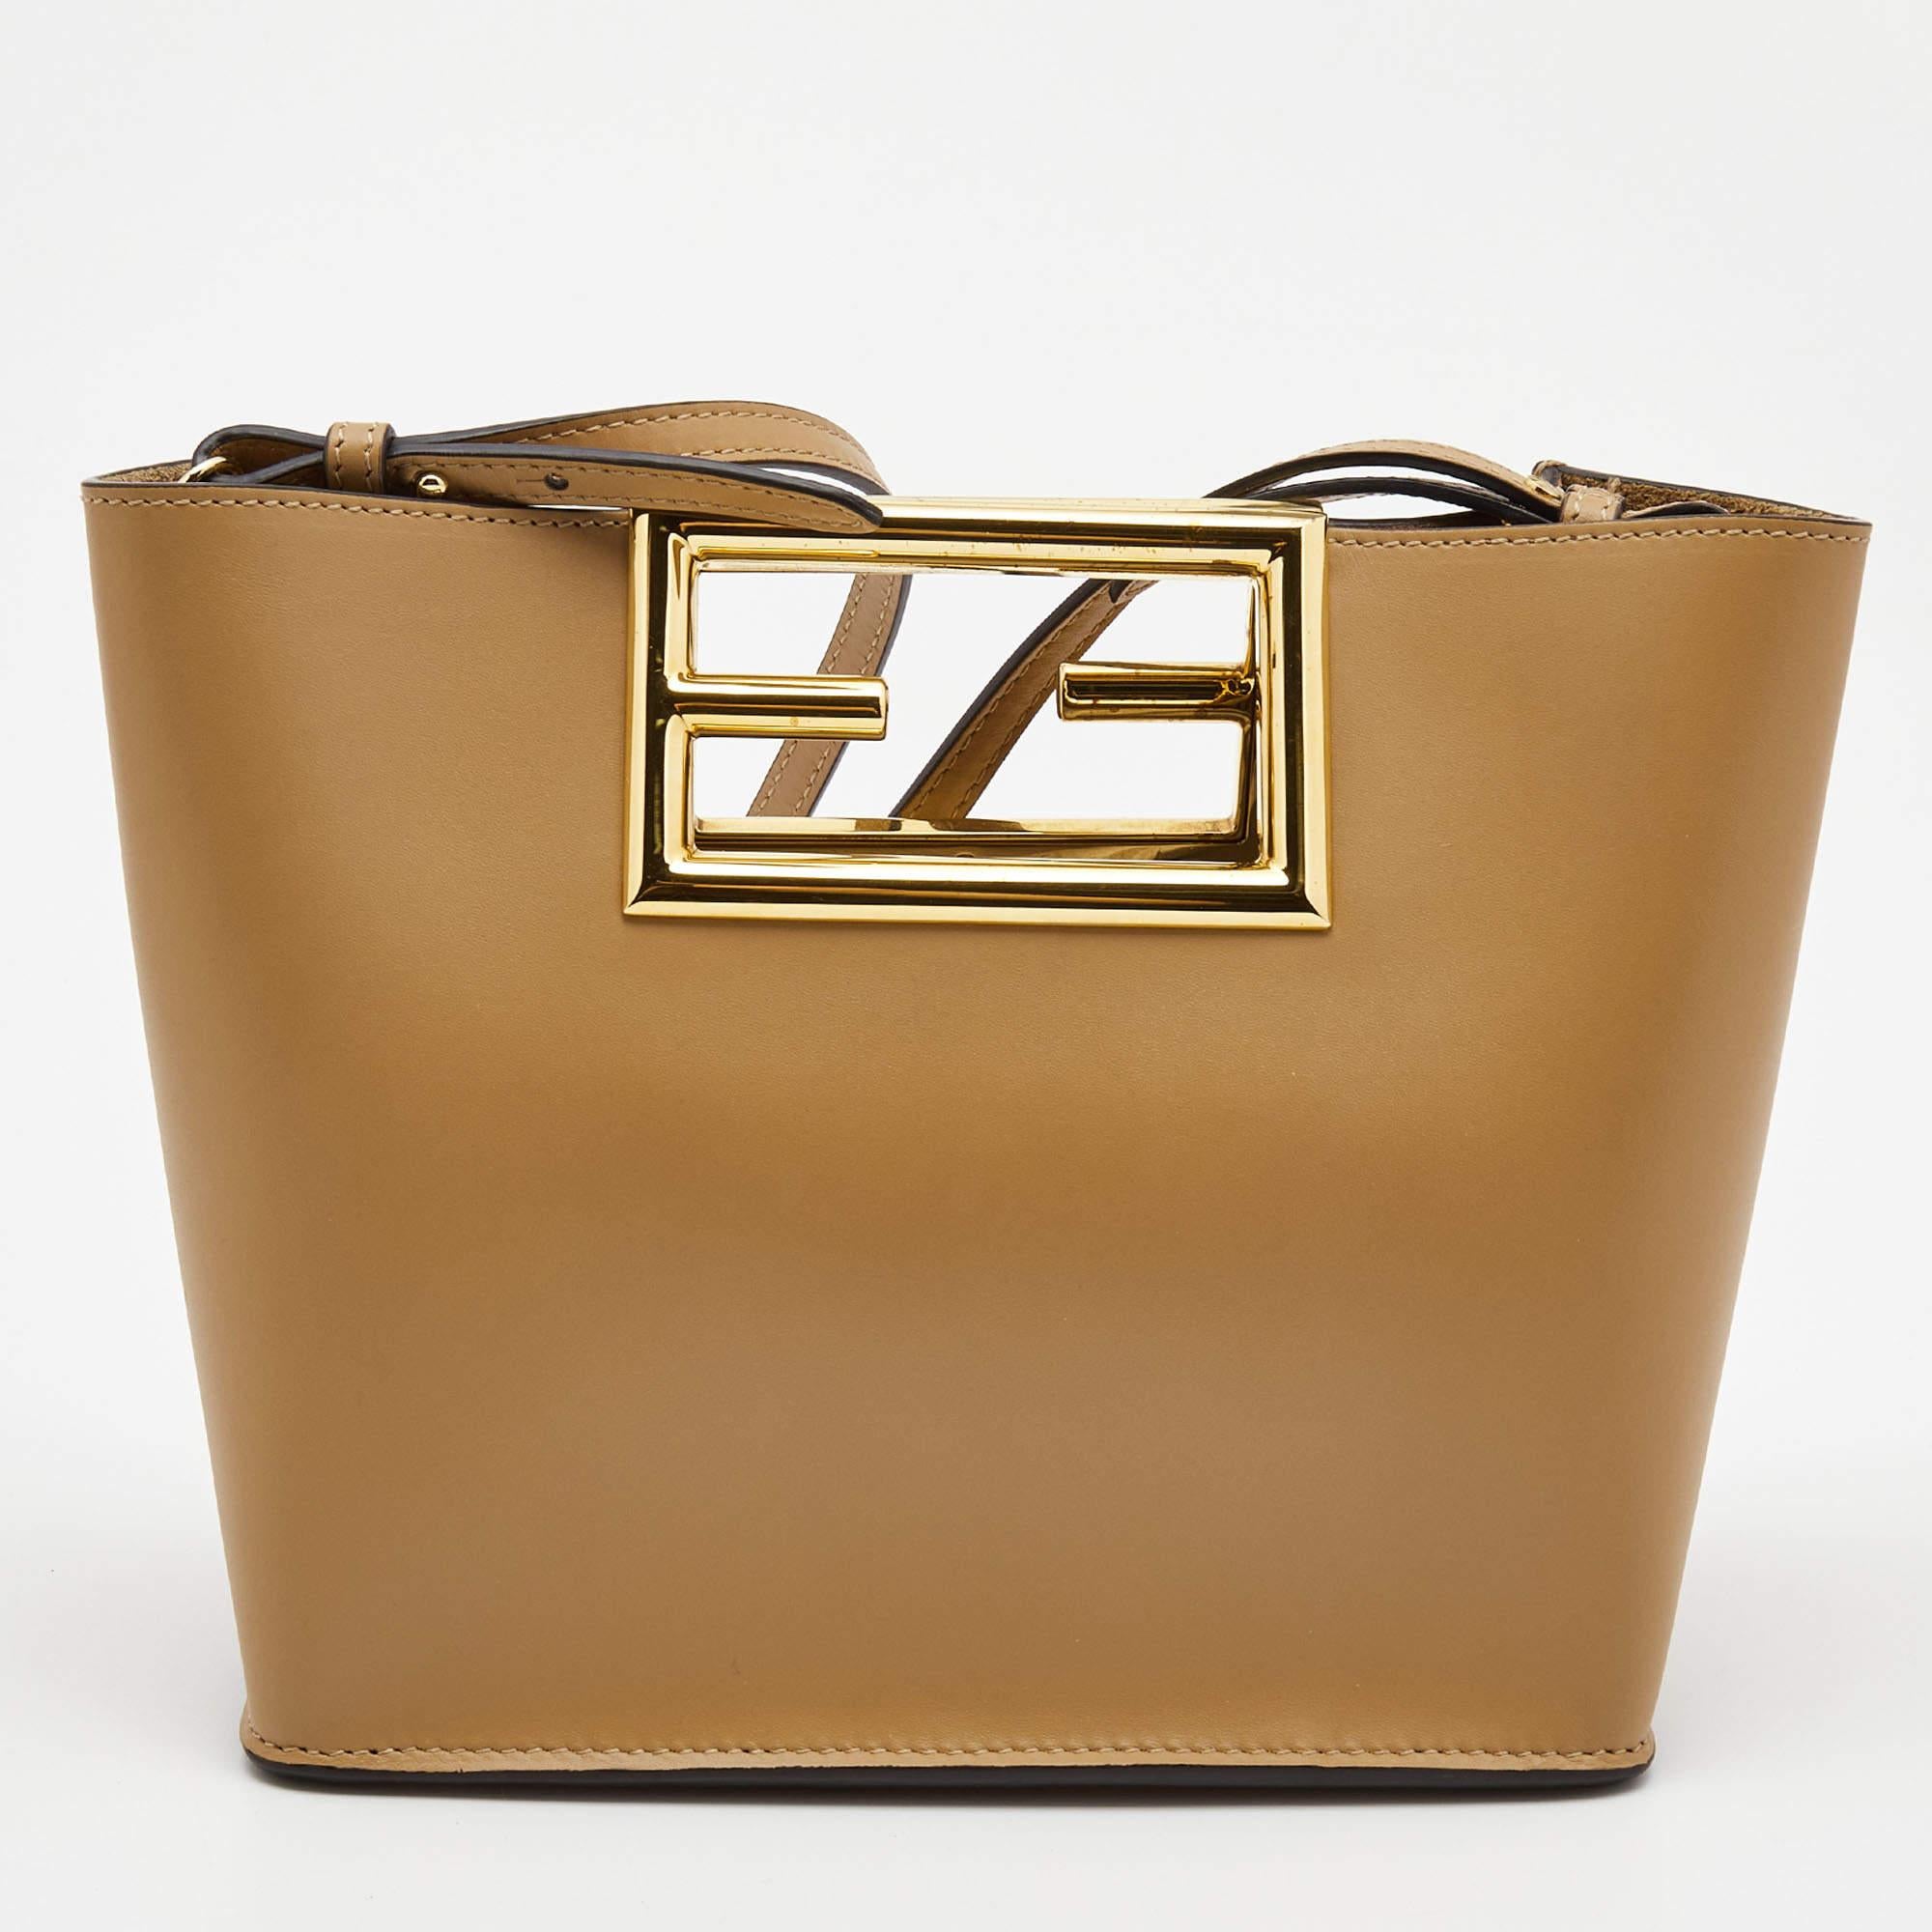 For a look that is complete with style, taste, and a touch of luxe, this designer bag is the perfect addition. Flaunt this beauty on your shoulder and revel in the taste of luxury it leaves you with.

Includes: invoice, Original Dustbag, Original